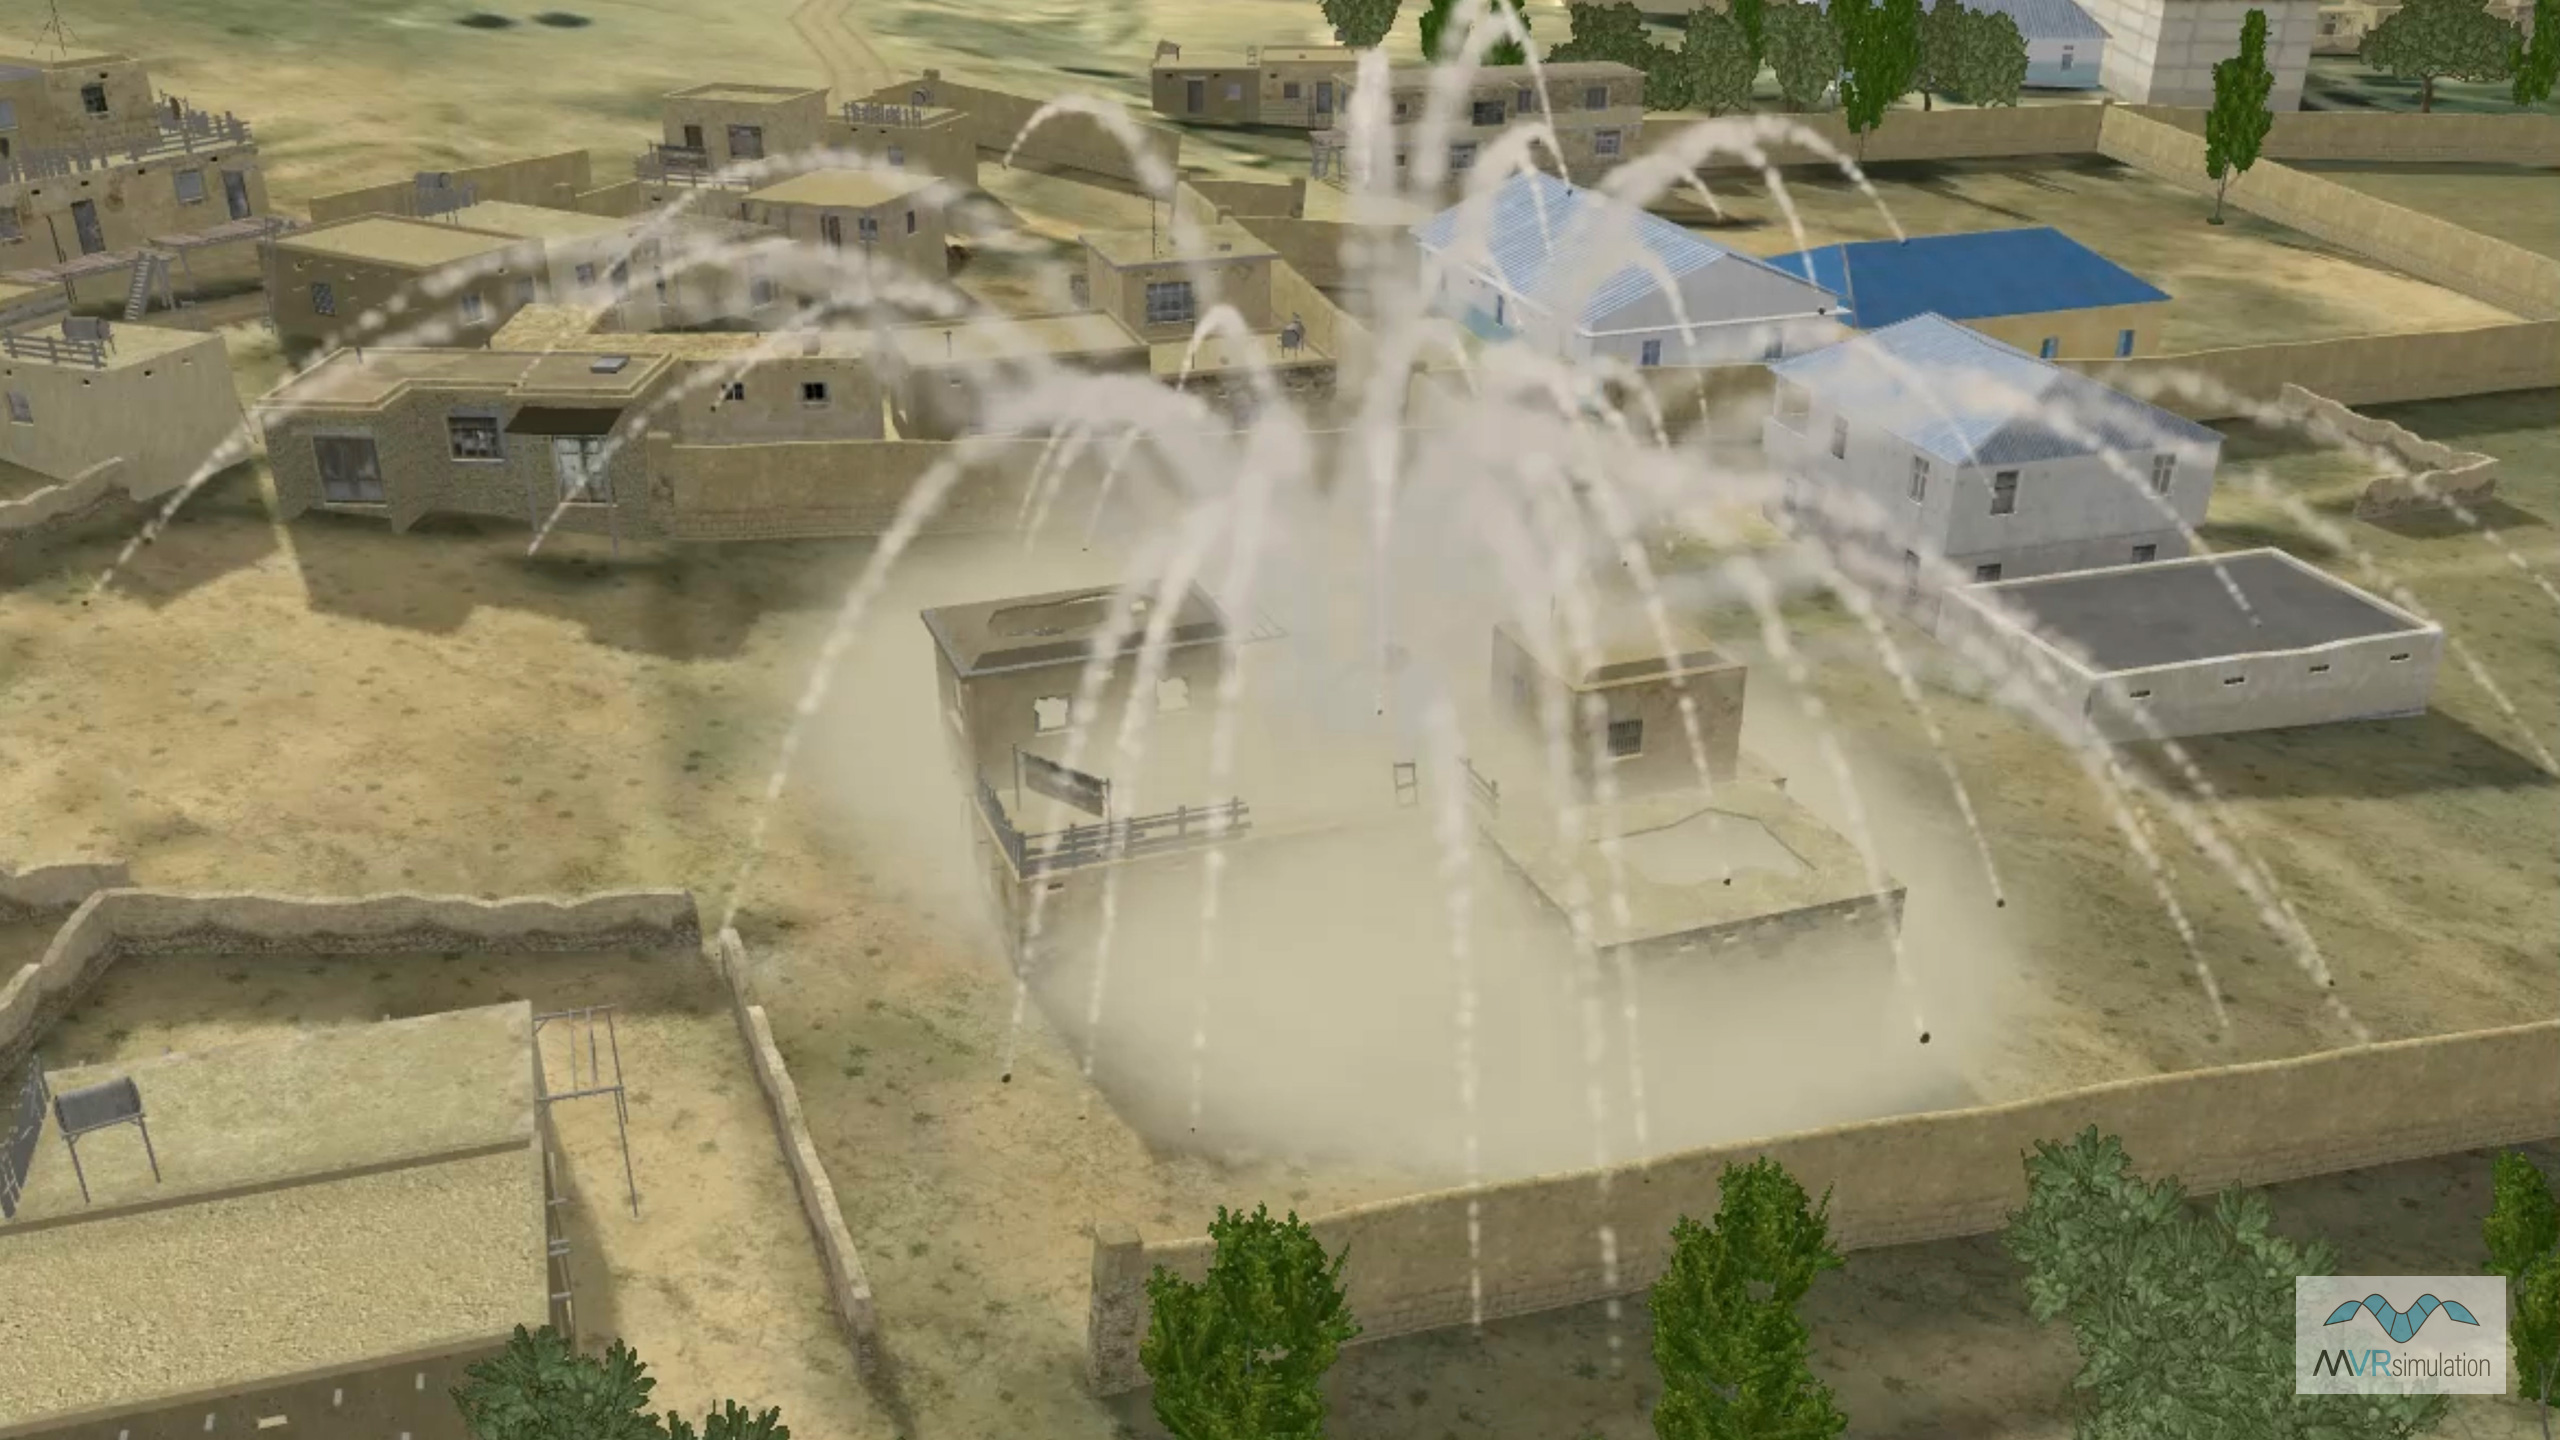  MVRsimulation VRSG's solid particle effects, which model projectiles and dust trails being cast from detonation events.